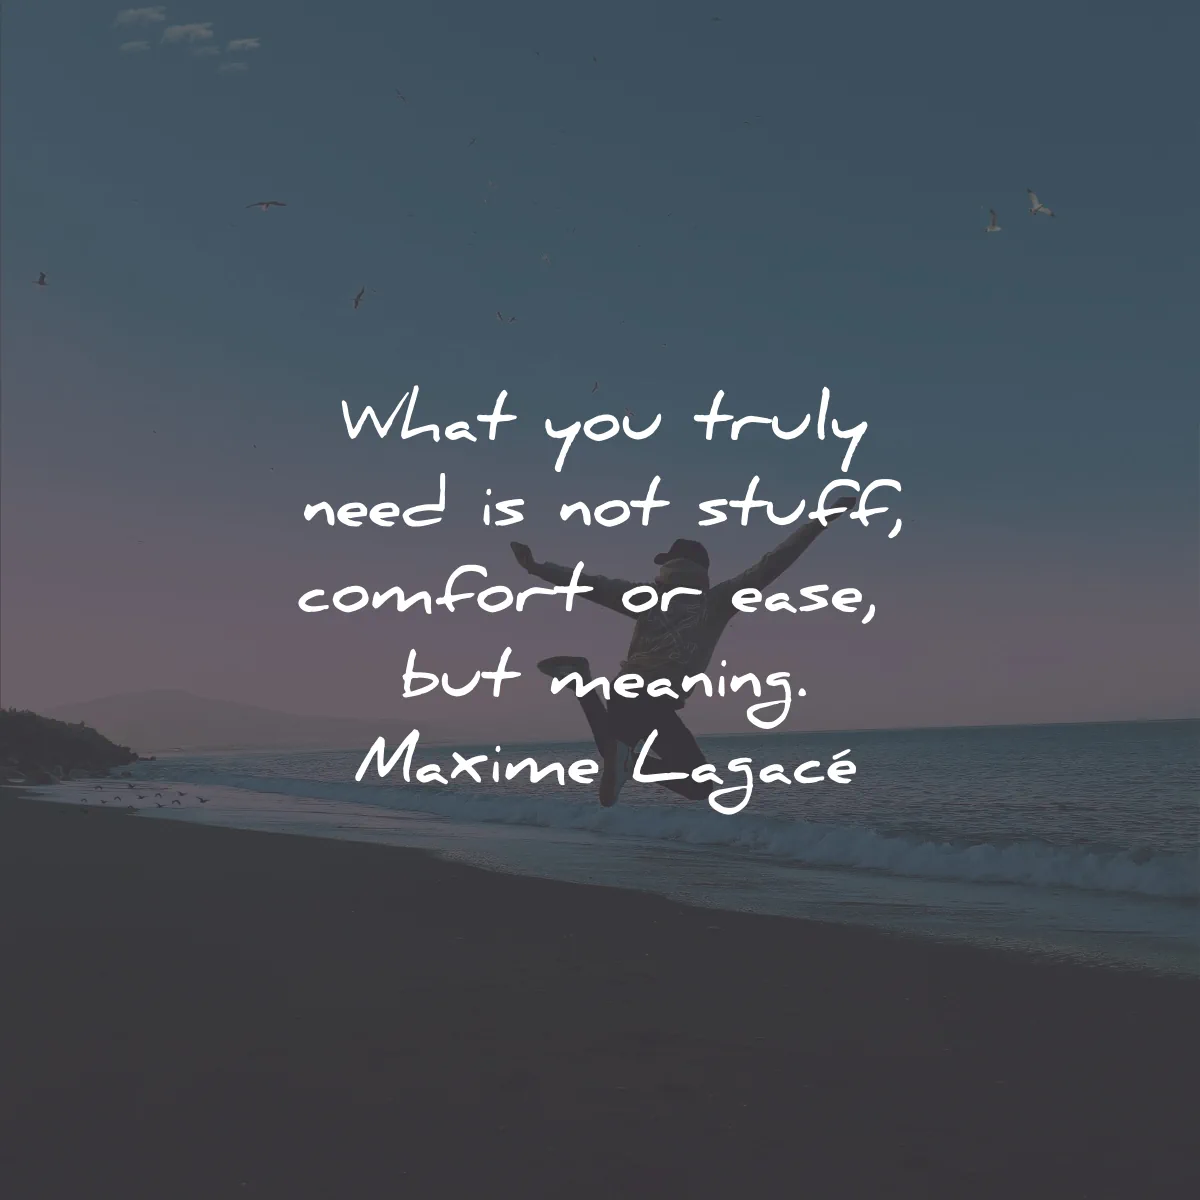 deep quotes truly need stuff comfort easy meaning maxime lagace wisdom